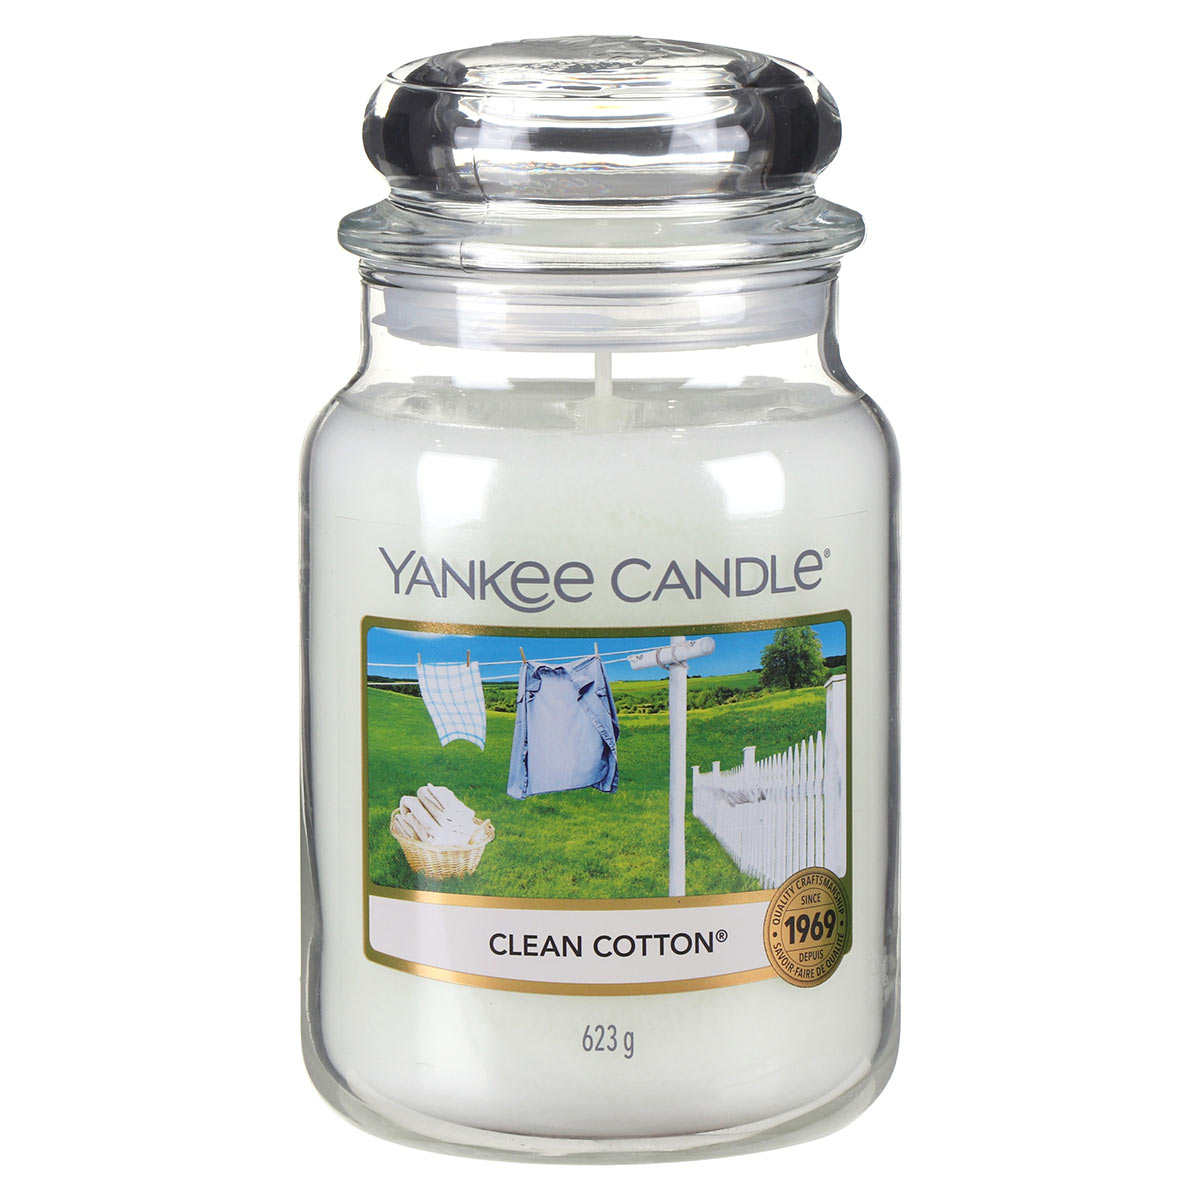 YANKEE CANDLE CLEAN COTTON 623G